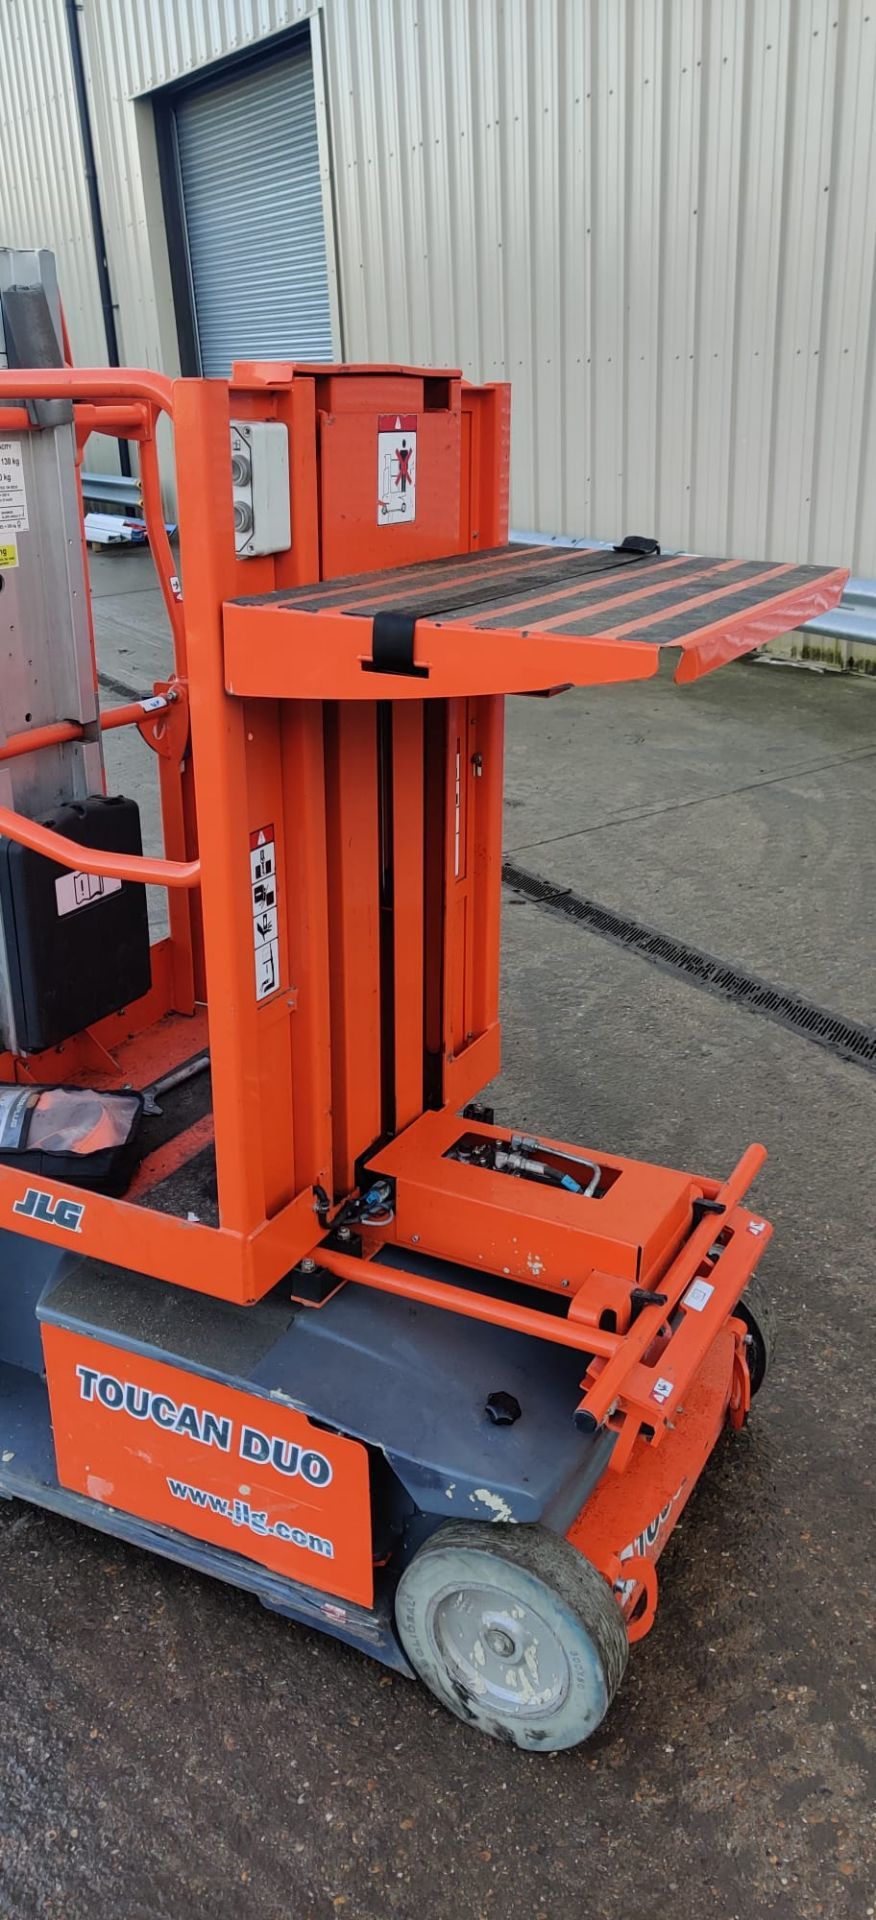 2016 JLG TOUCAN DUO STOCK PICKER, SERVICED EVERY YEAR, CURRENT LOLER VALID TILL 04/22 *PLUS VAT* - Image 4 of 11